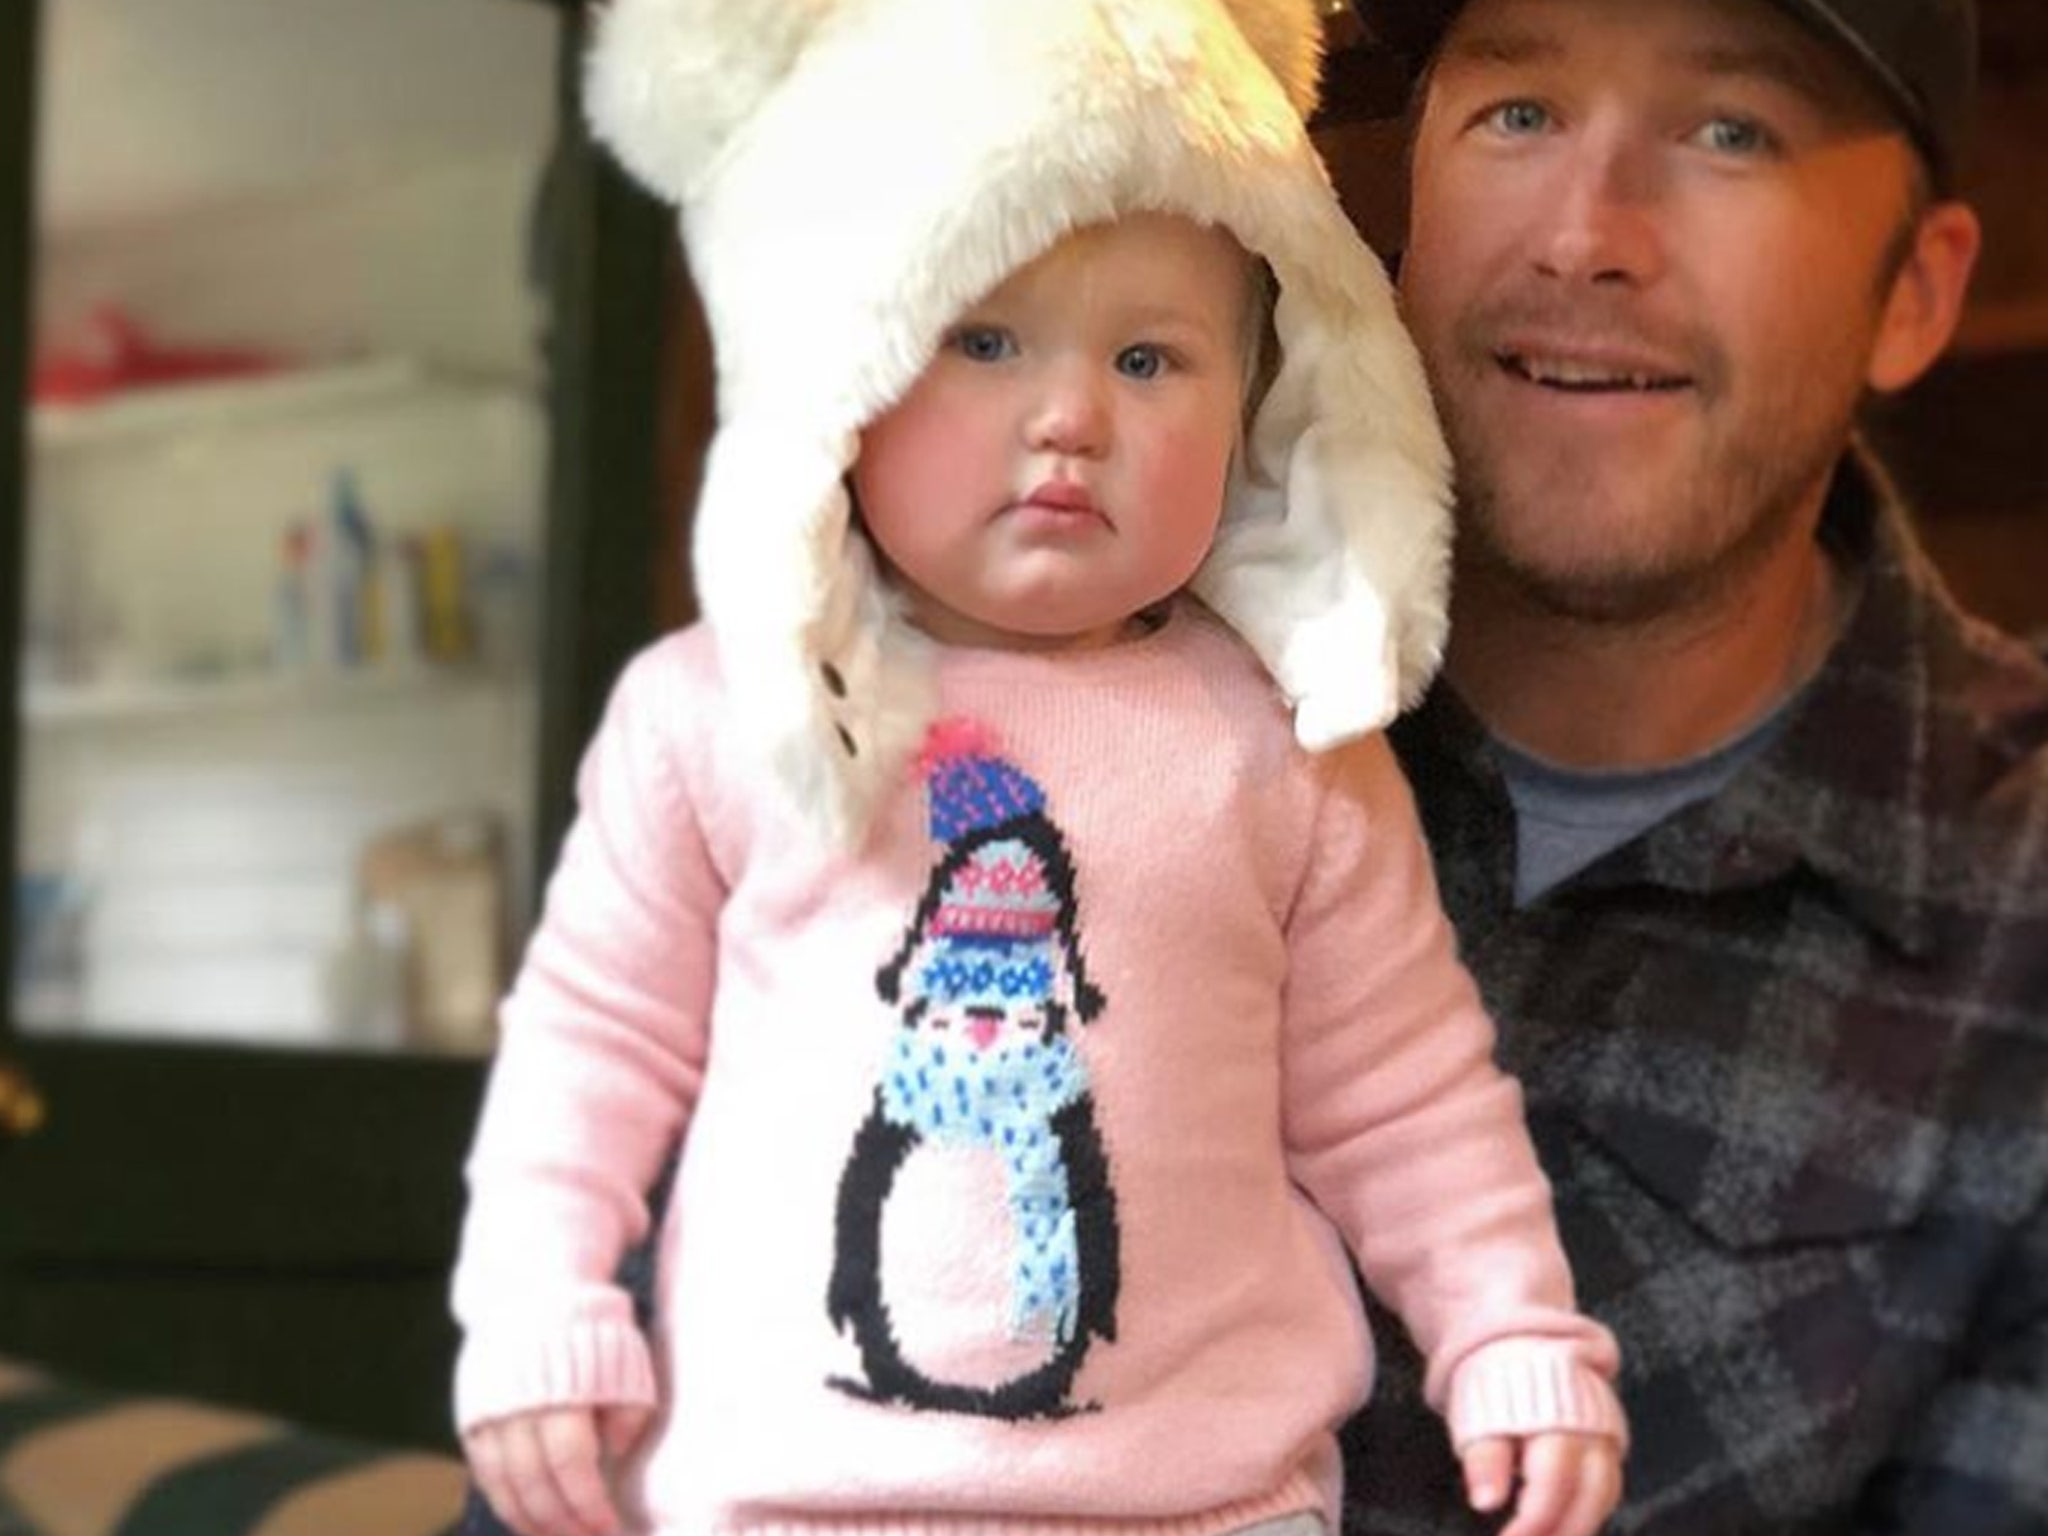 Bode Miller's wife shares pain after baby girl's drowning